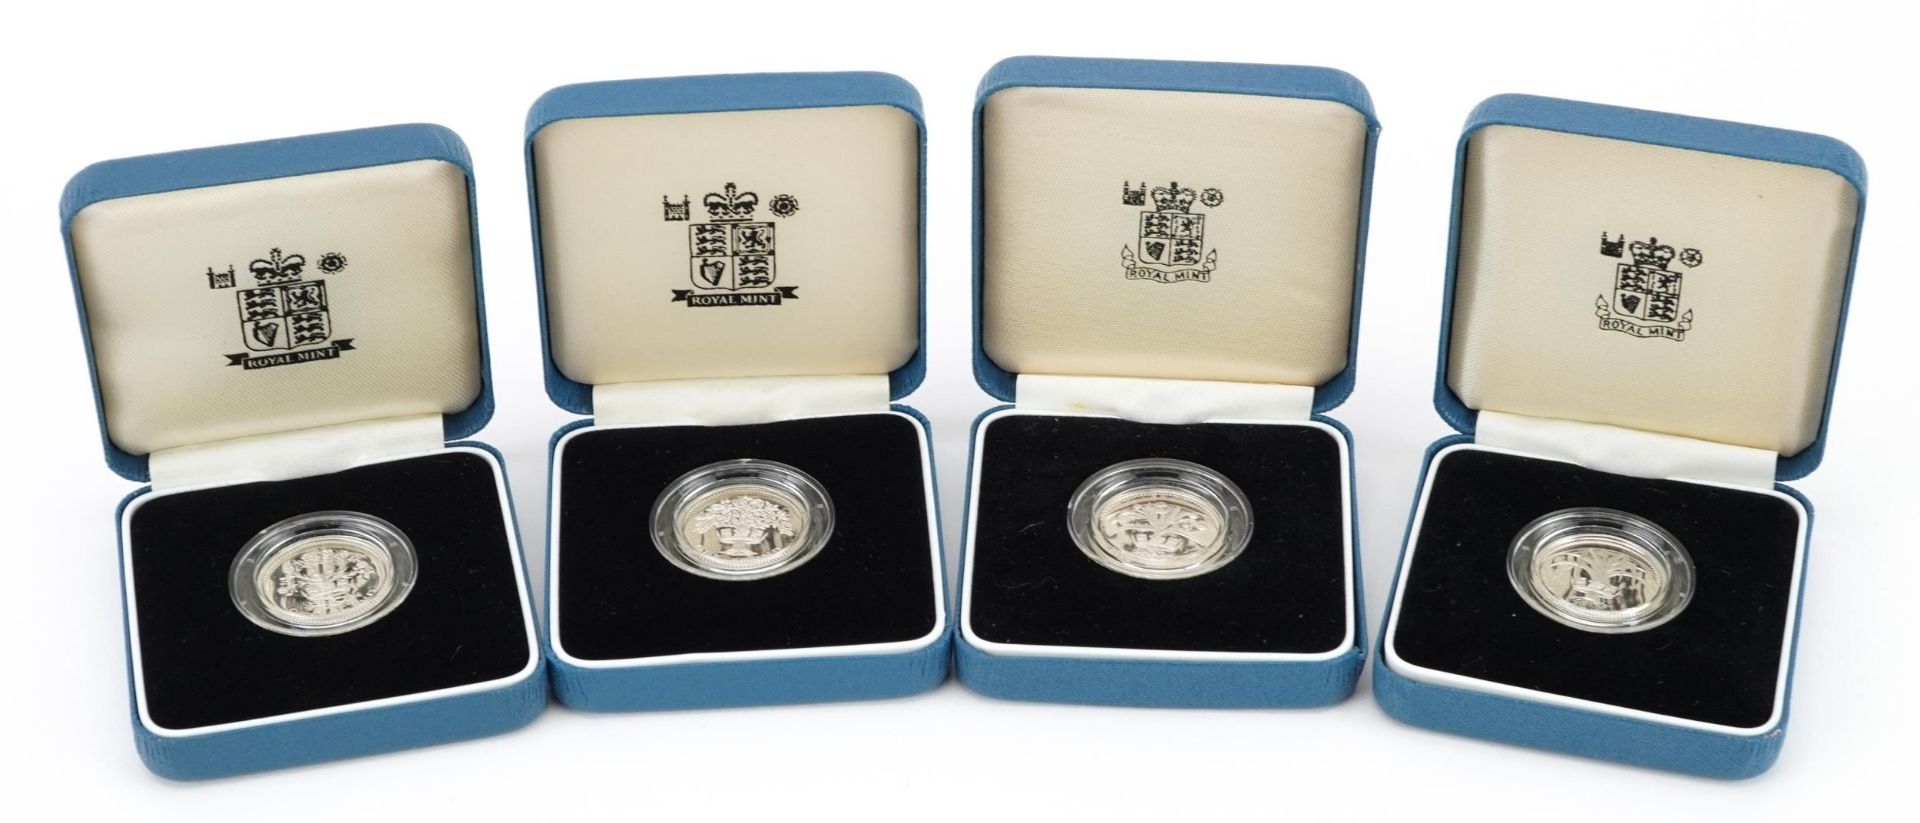 Four United Kingdom silver proof one pound coins by The Royal Mint with certificates and cases